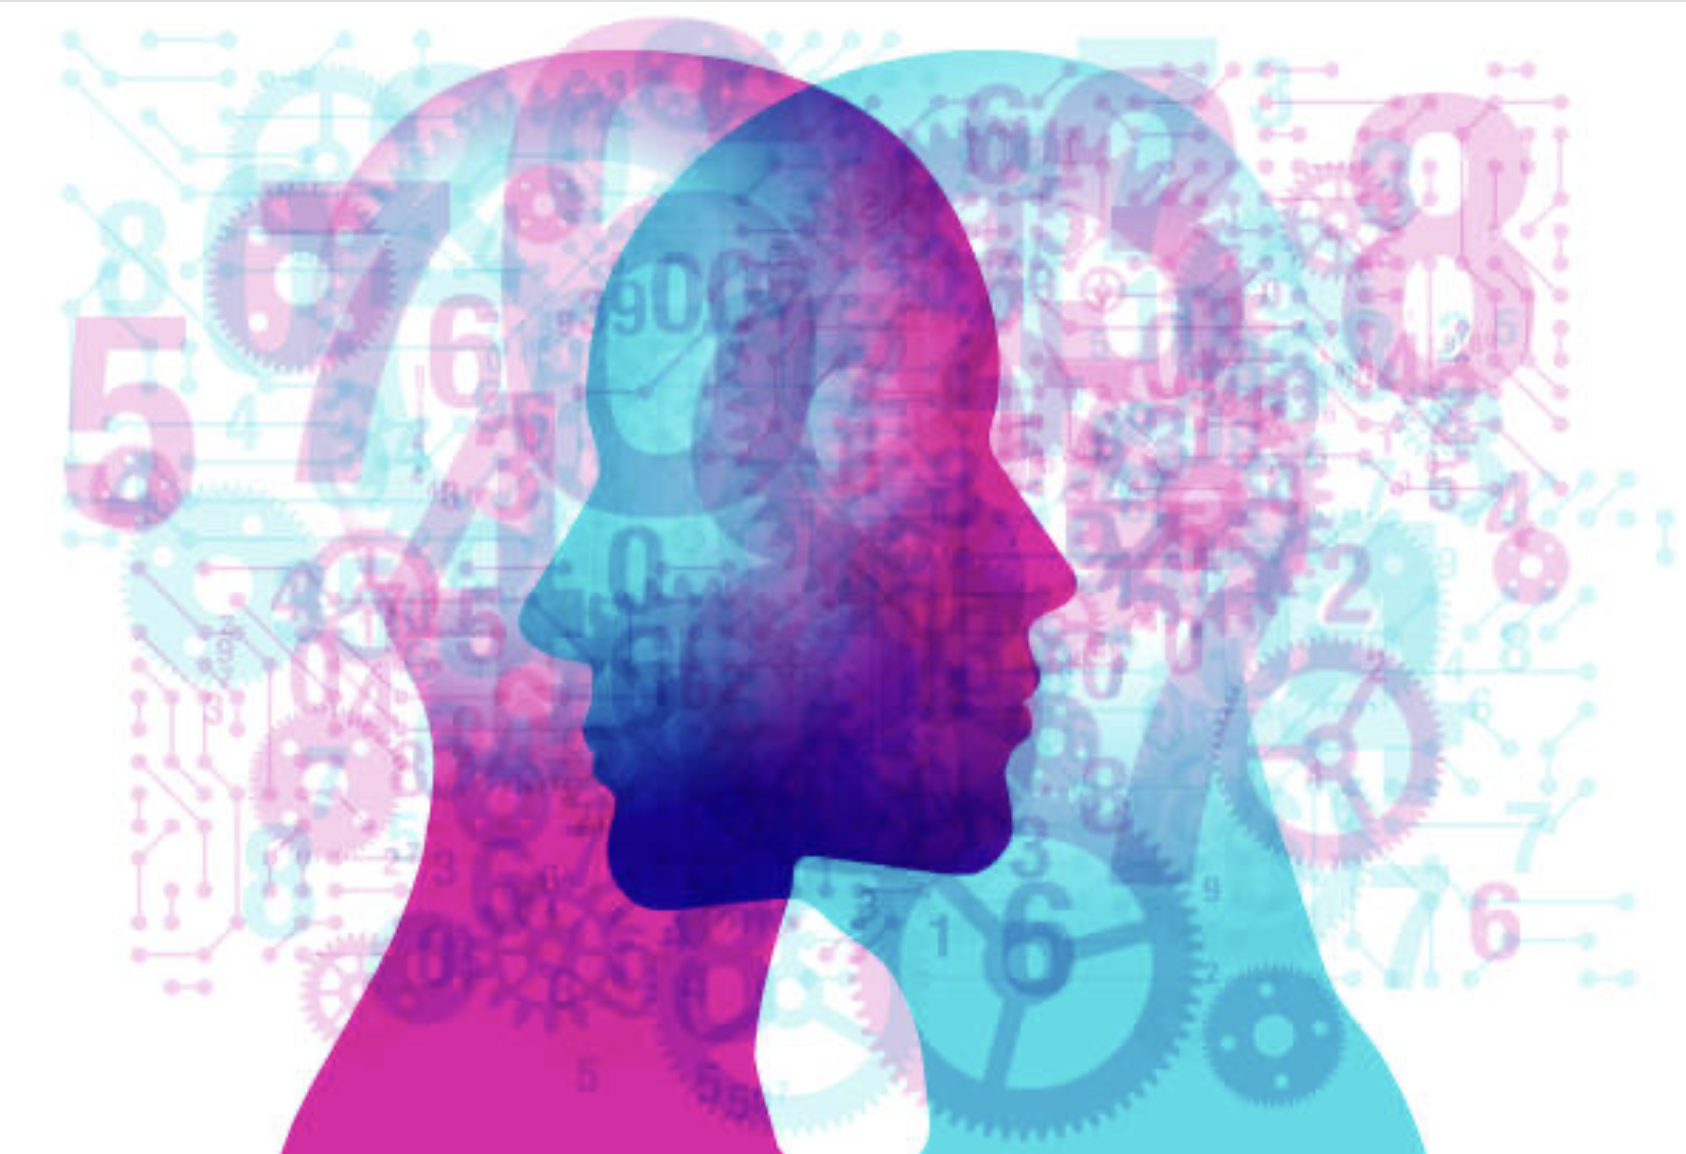 A male and female side silhouette positioned face to face, overlaid with various semi-transparent shapes, machine gears, circuit board patterns and numbers.